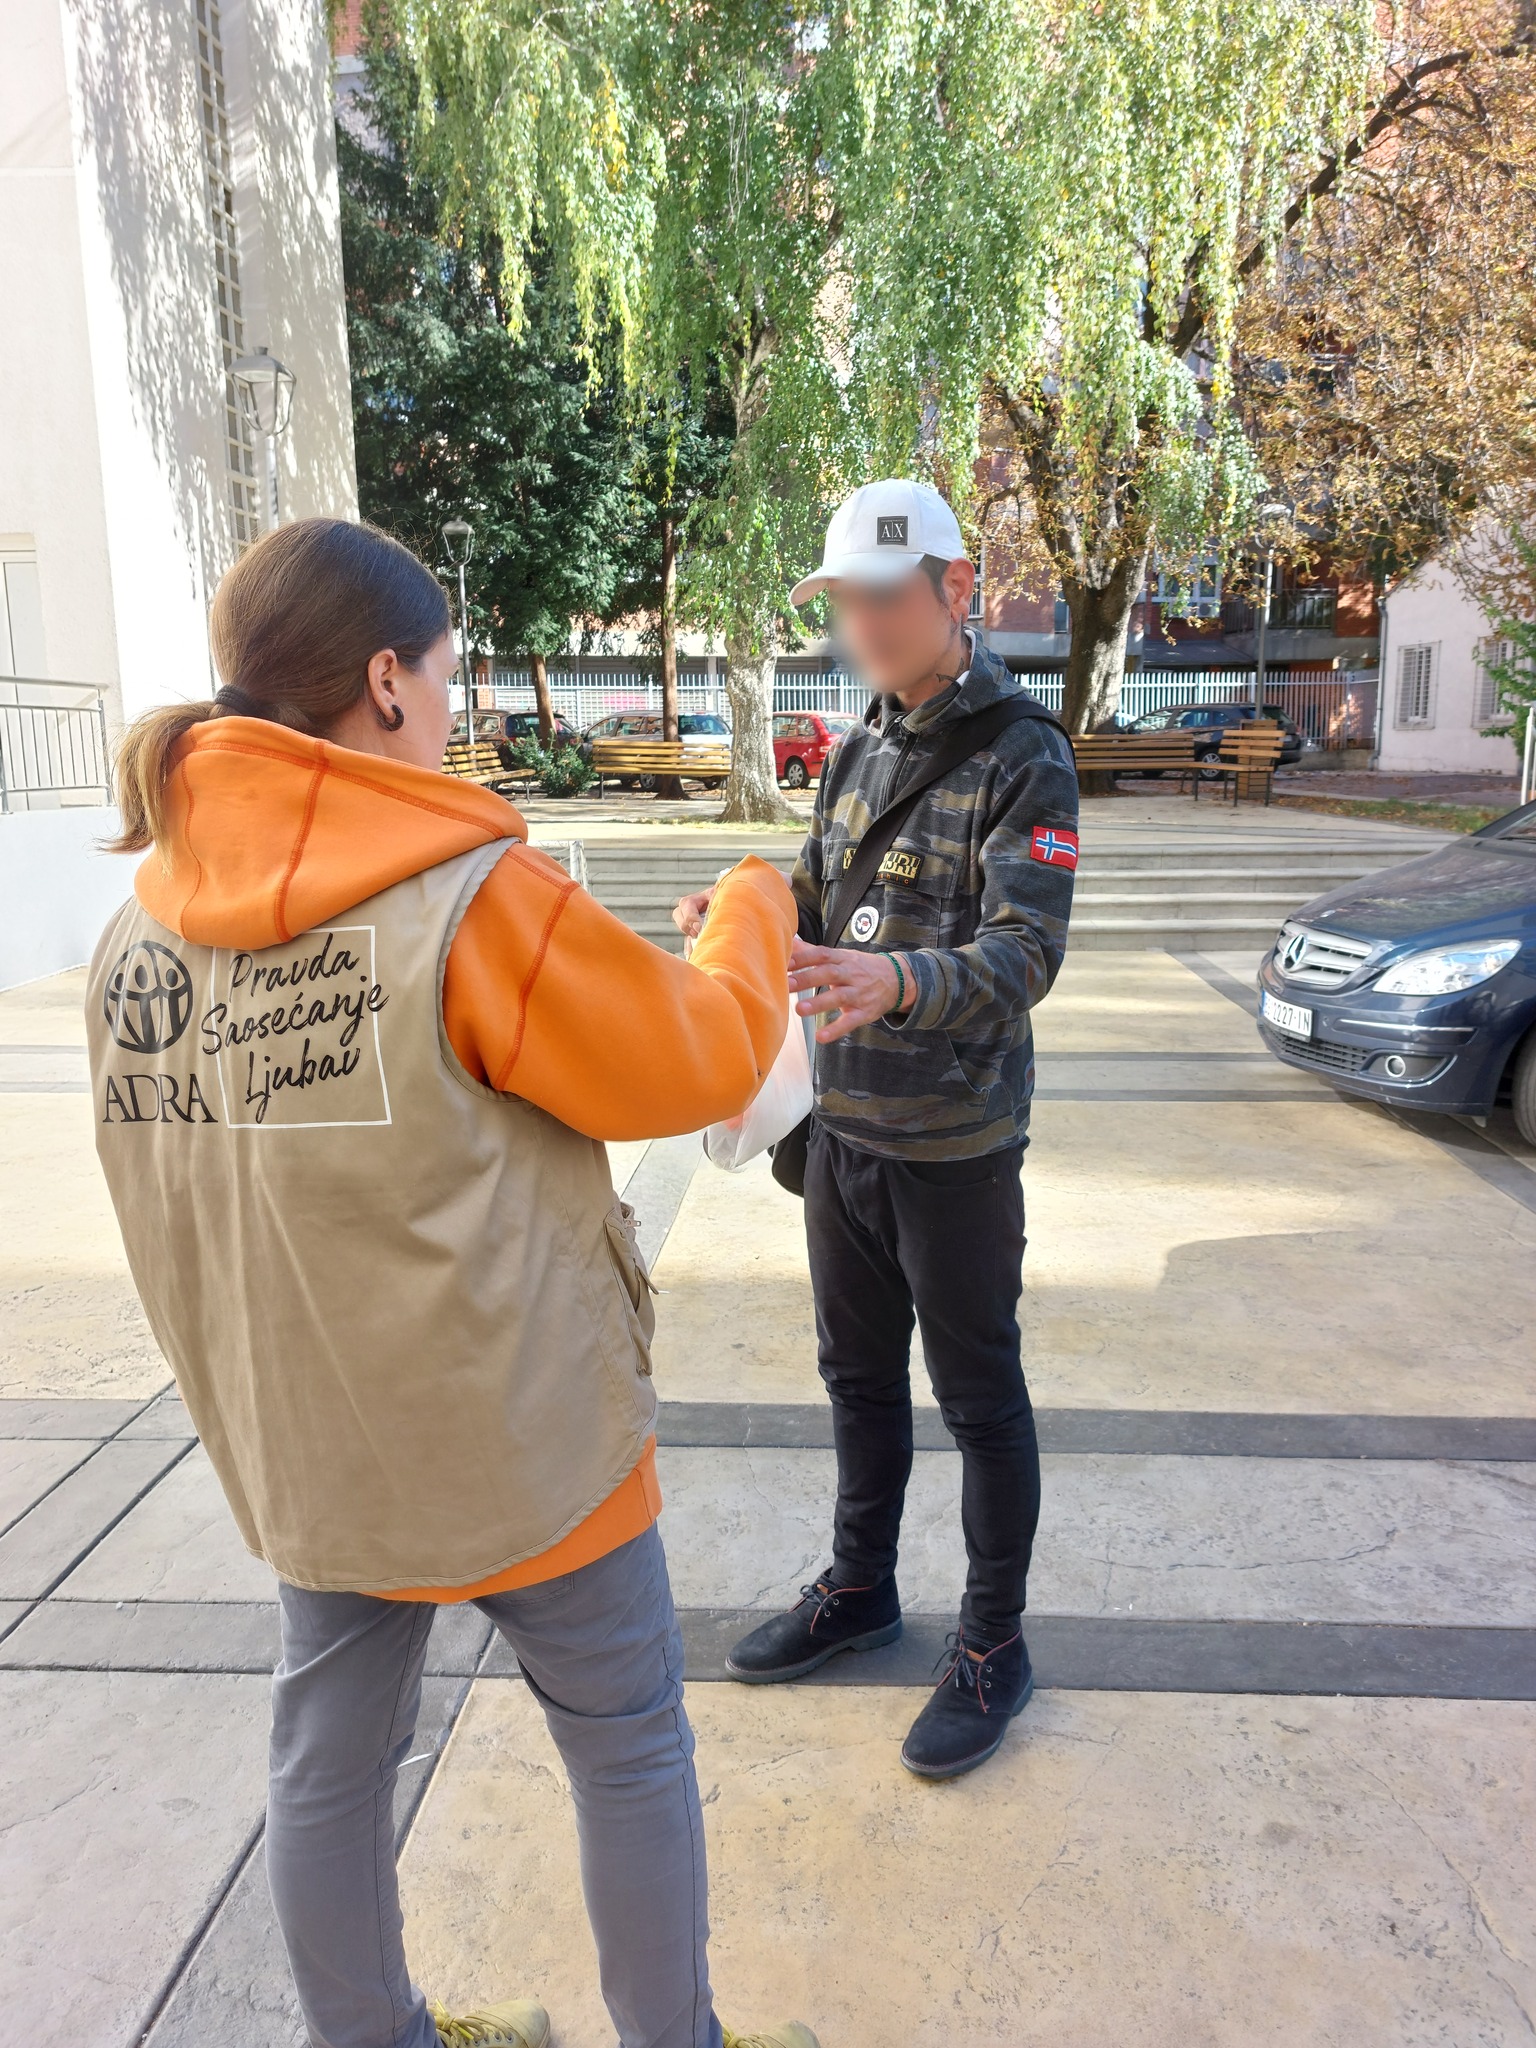 ADRA Serbia helping homeless people in Beograd